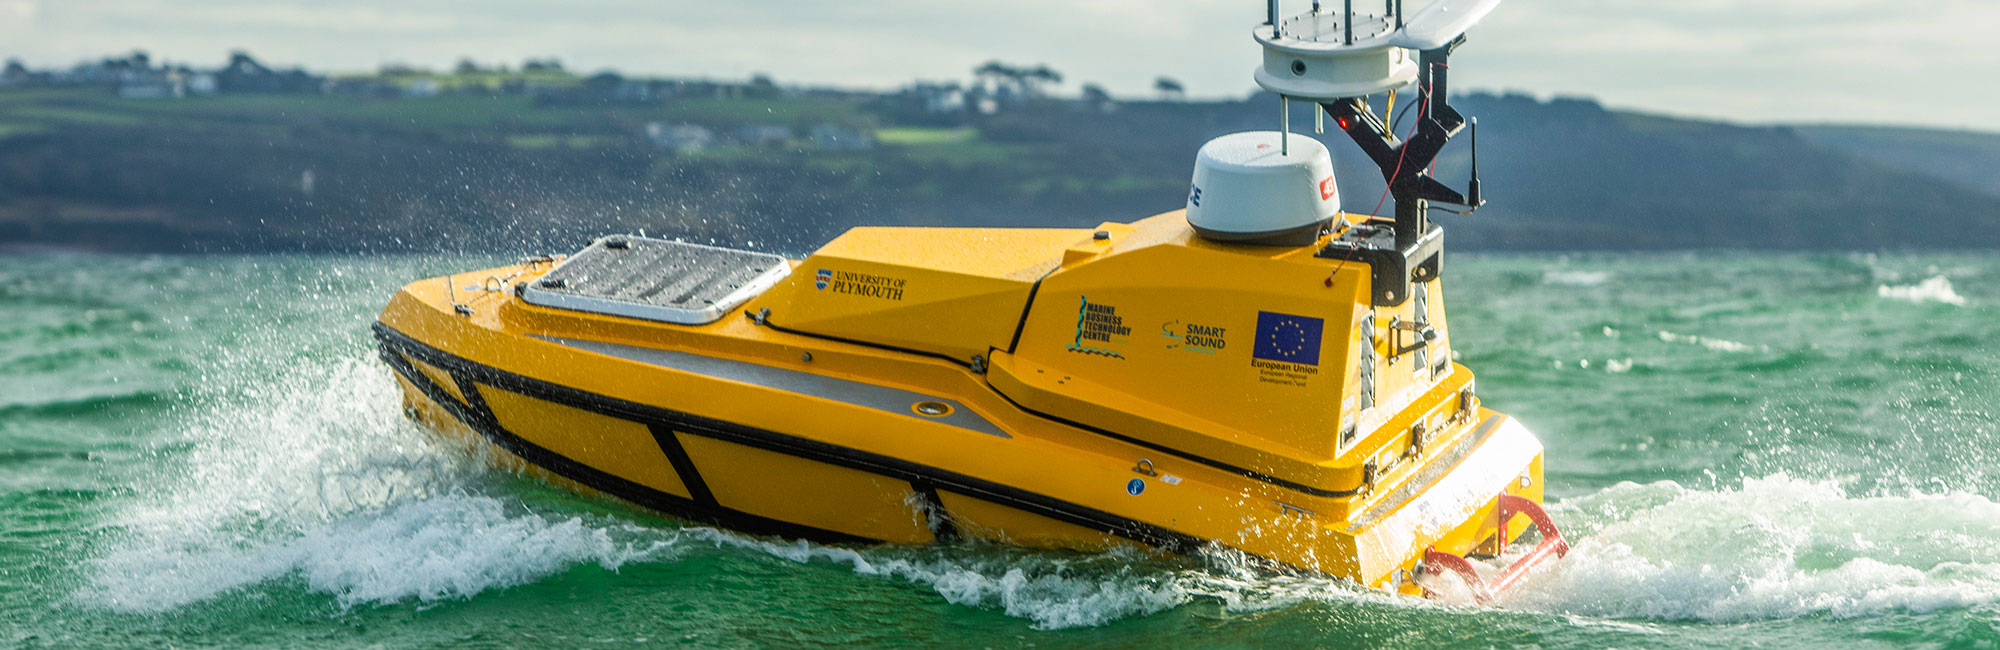 The new yellow unmanned vessel at sea